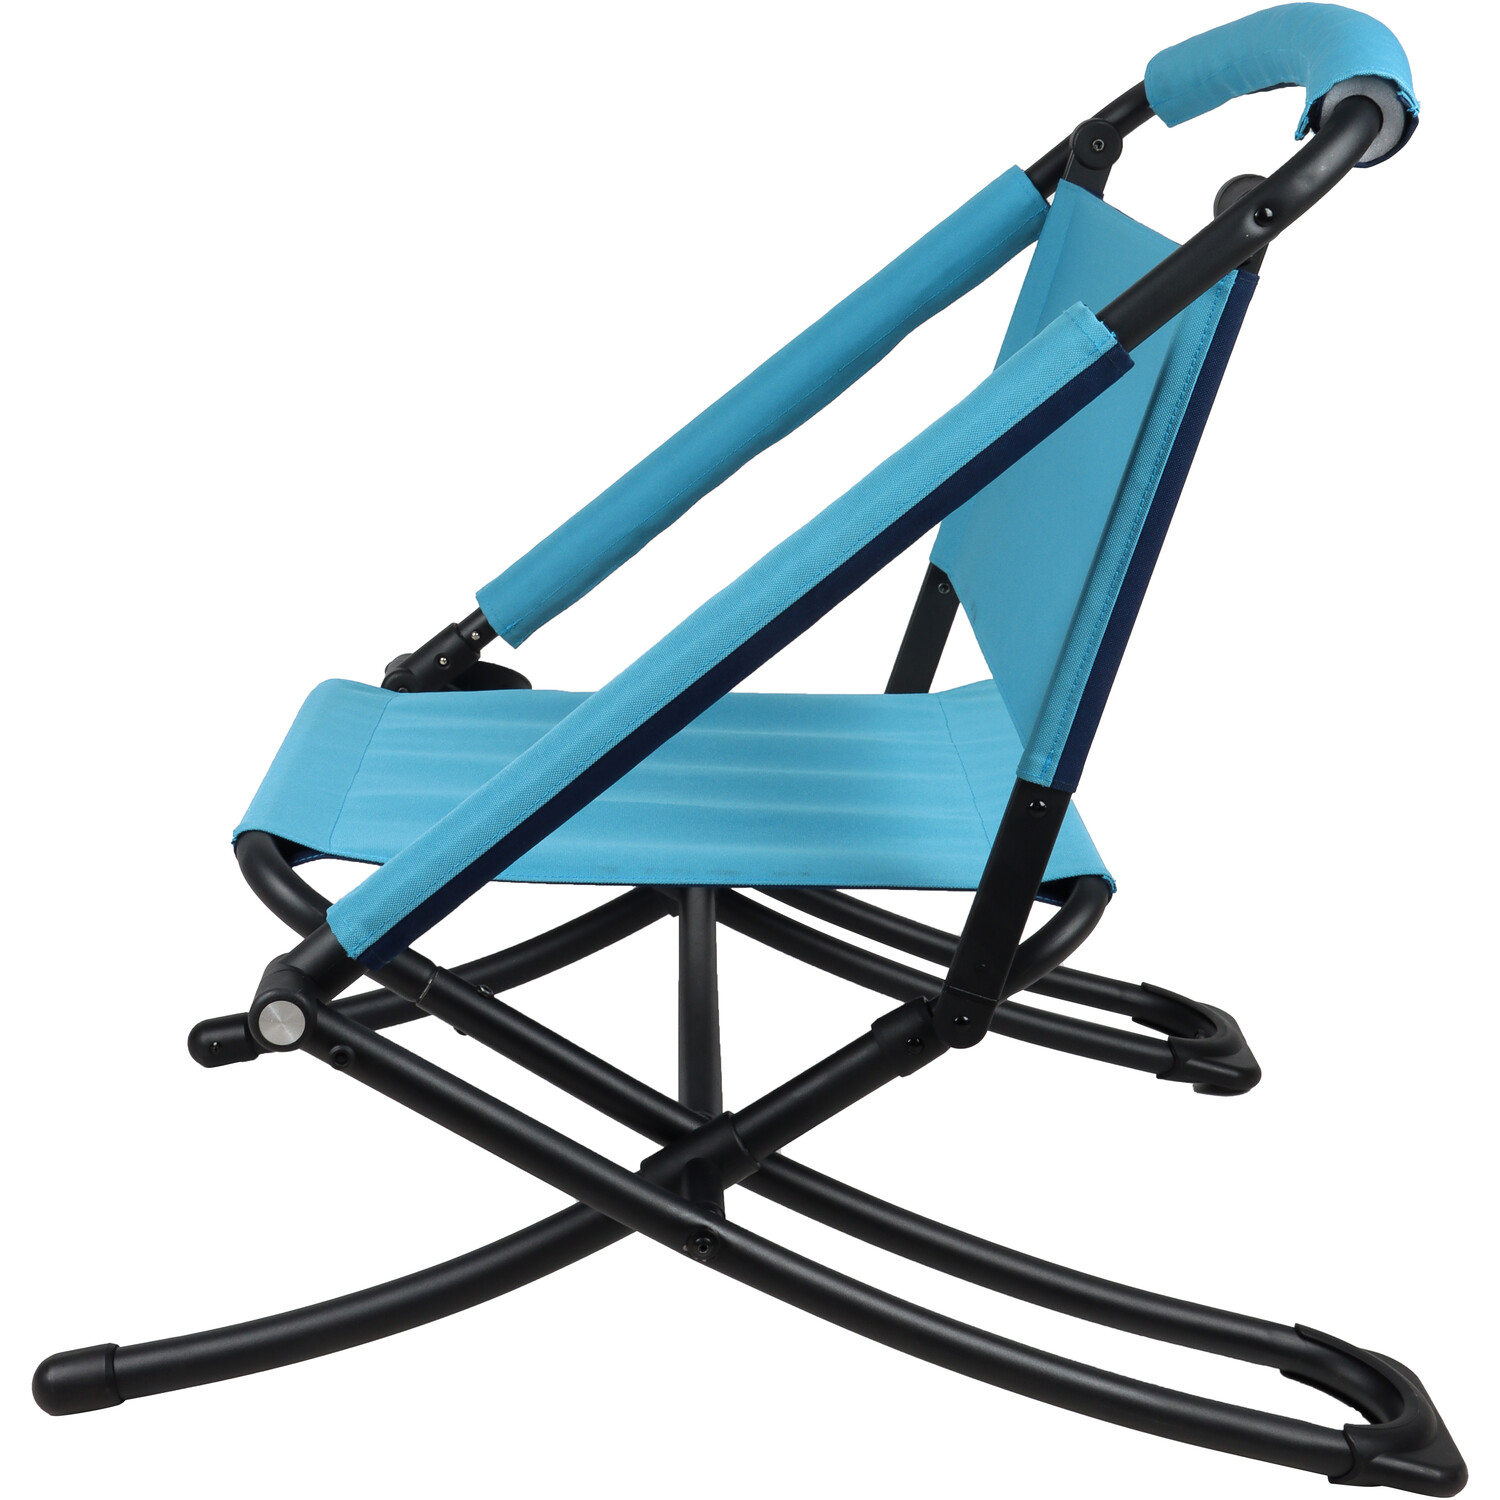 Multifunction Camping Chair Image 1